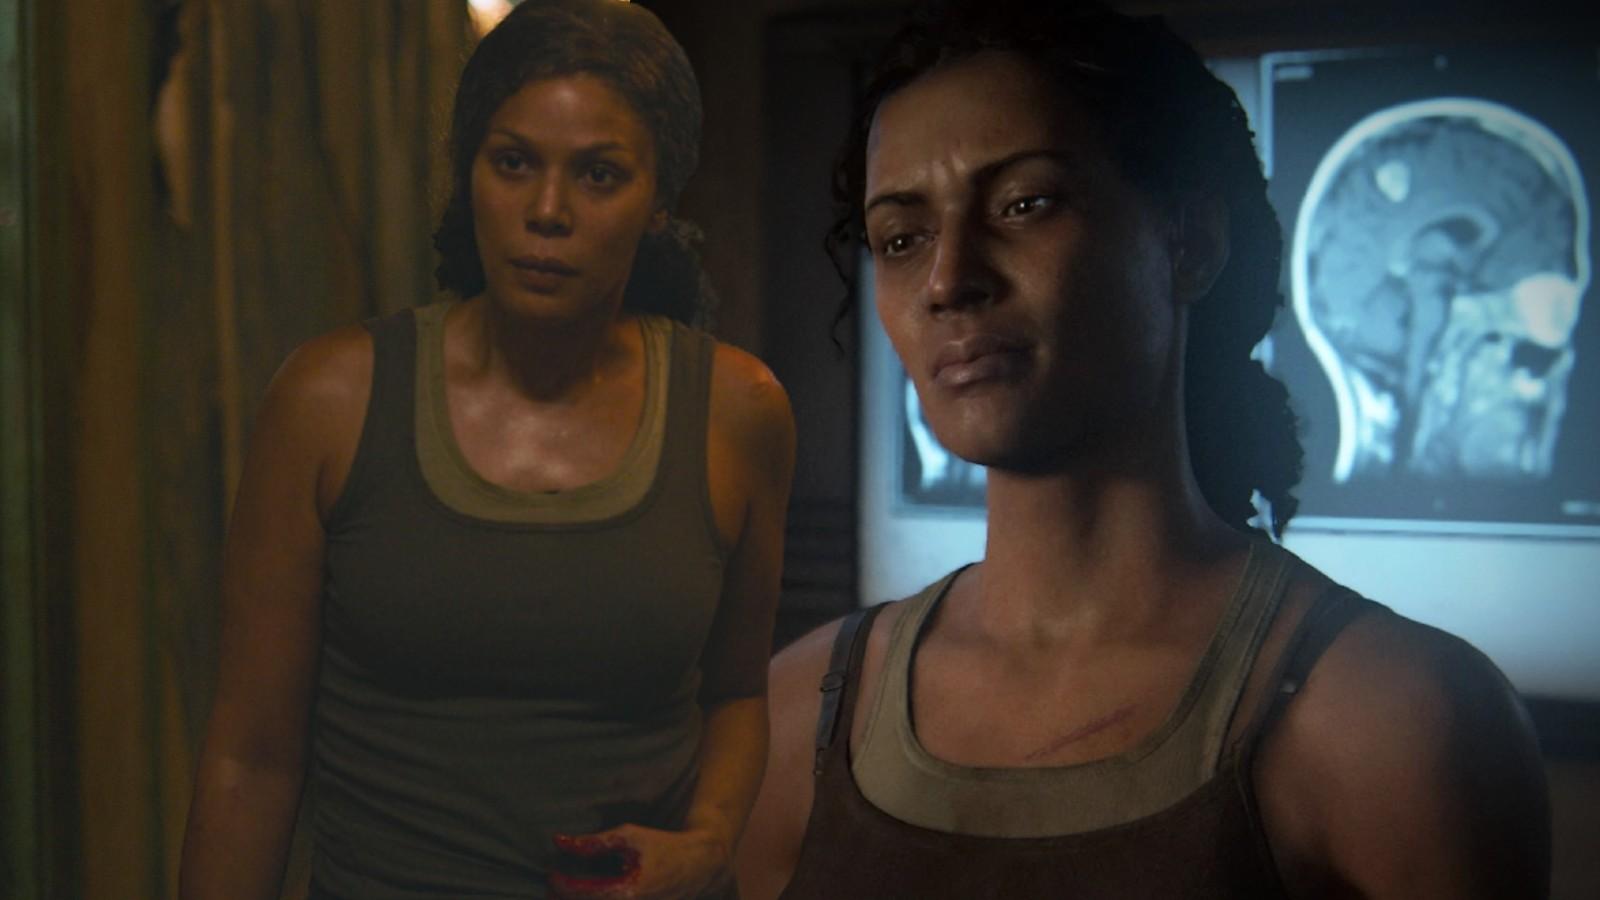 Marlene in The Last of Us HBO show an dgame